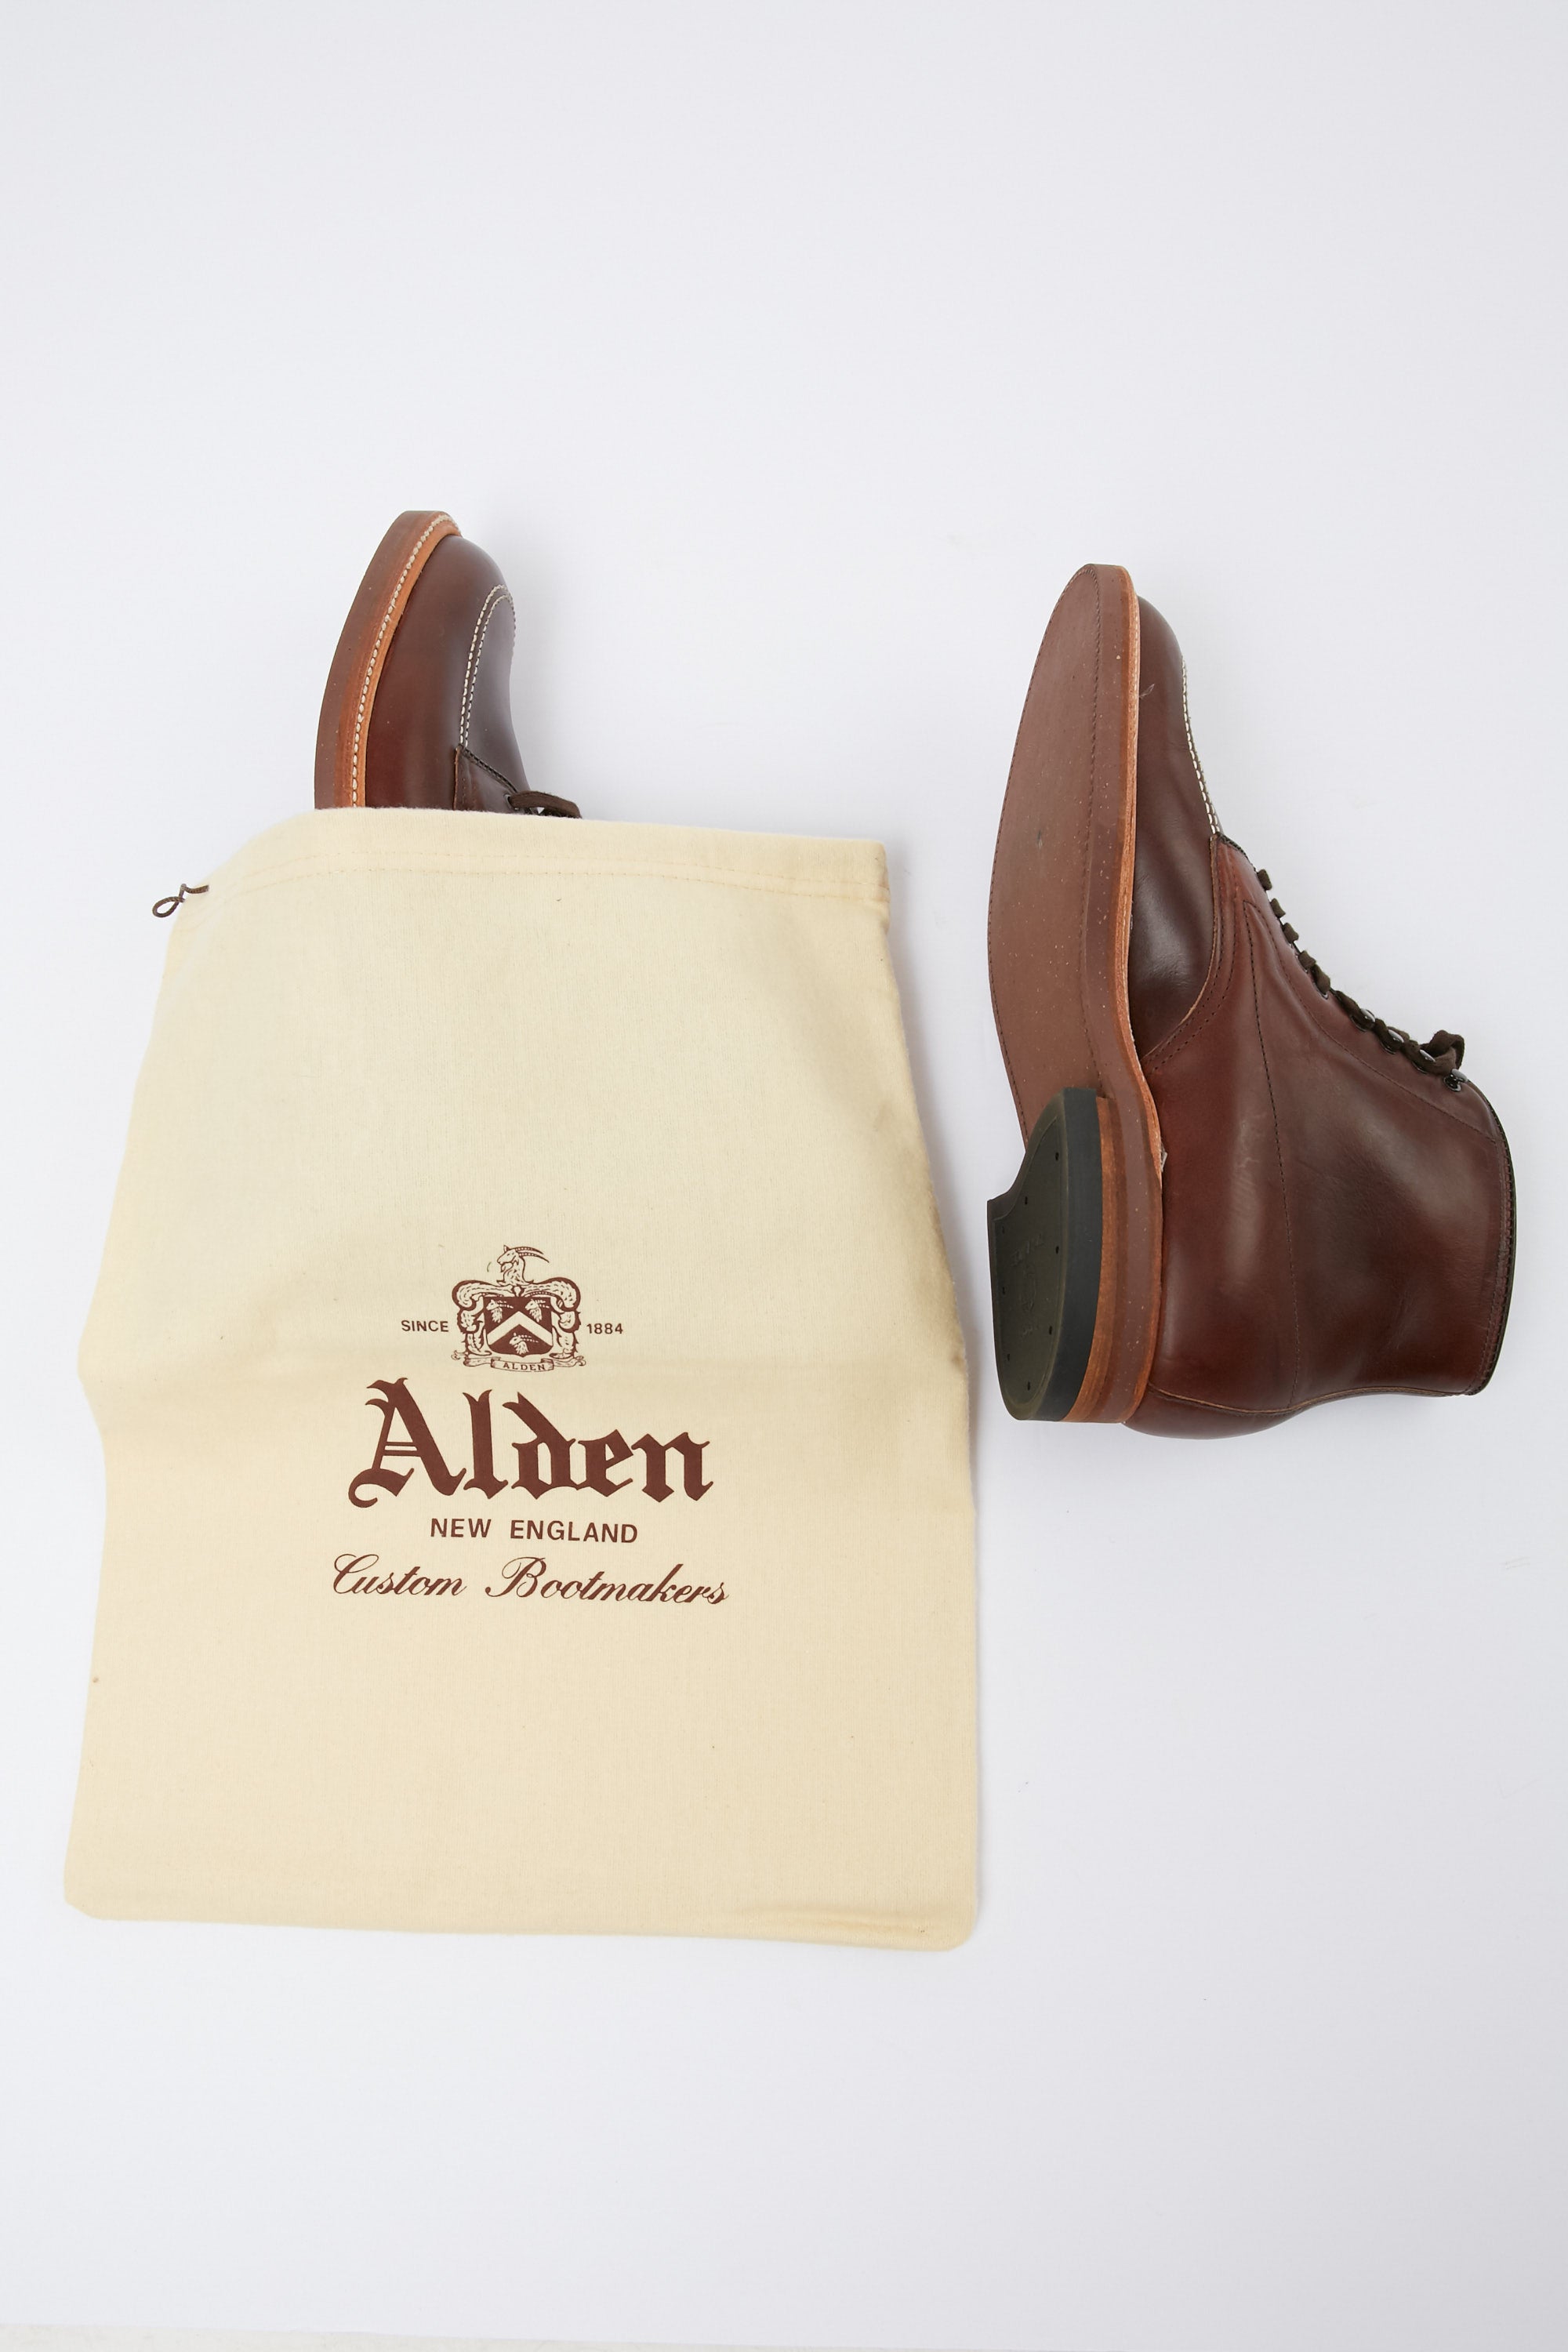 Alden 403 Indy Boot in Brown Chromexcel - Totem Brand Co.